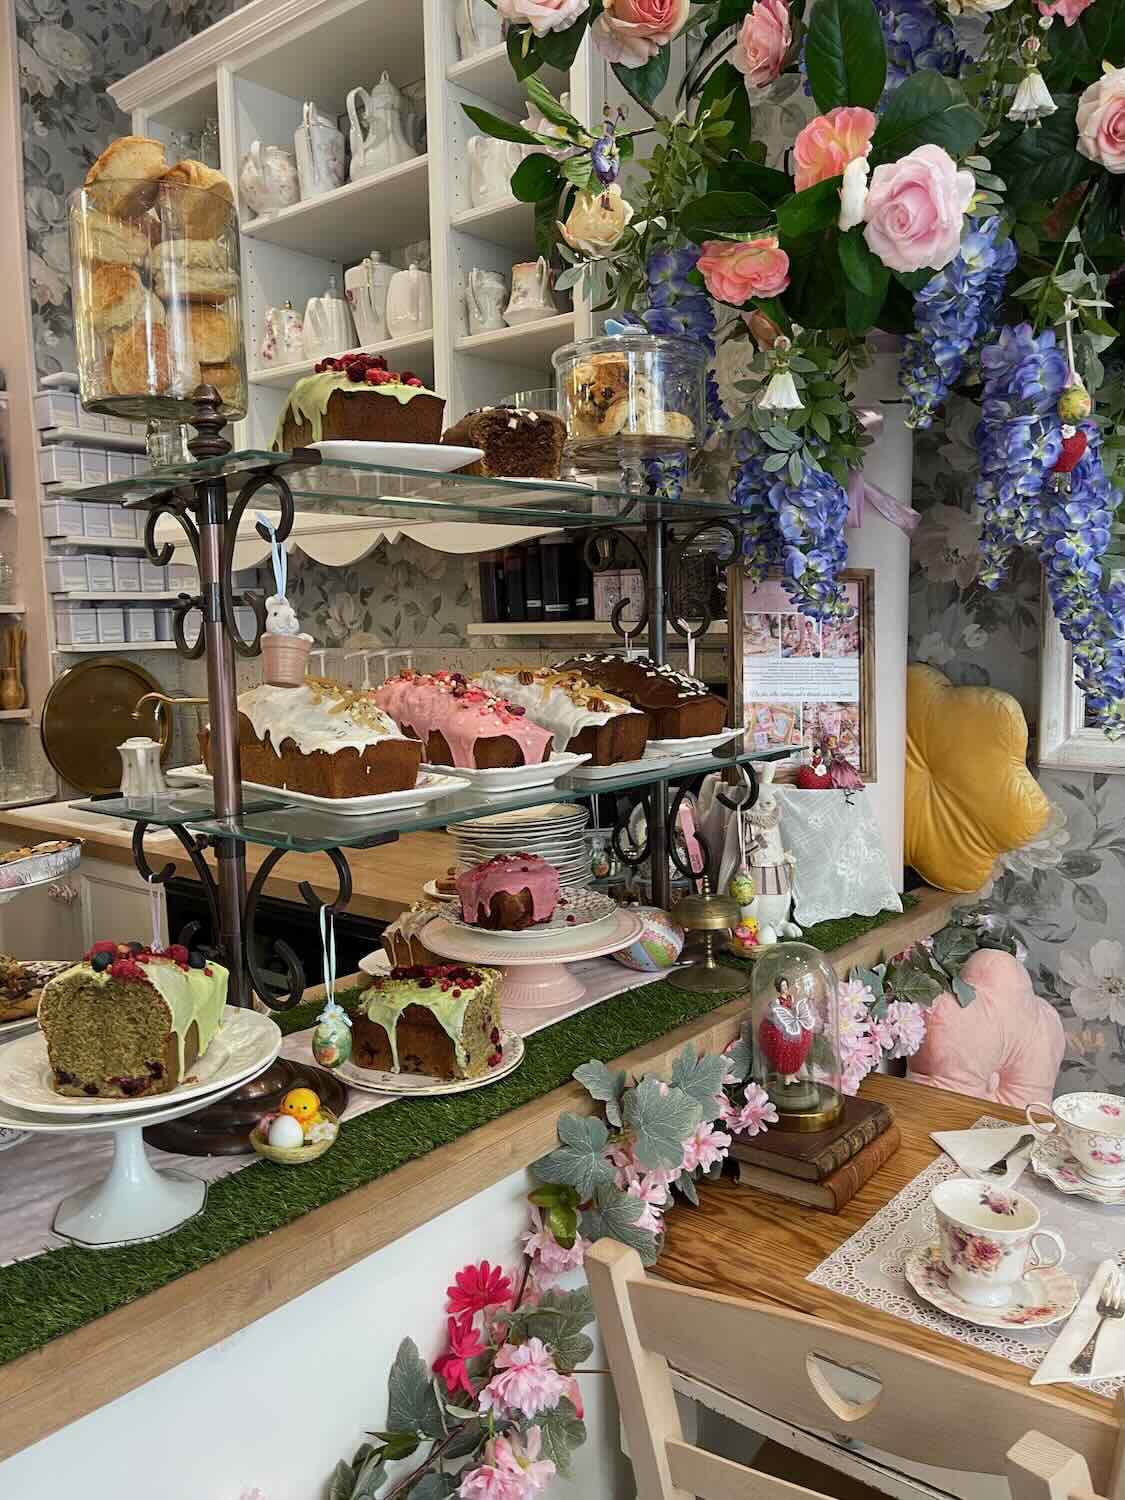 A quaint Parisian cake shop, lavishly decorated with flowers and an array of cakes displayed on elegant stands, creating a charming and inviting atmosphere.